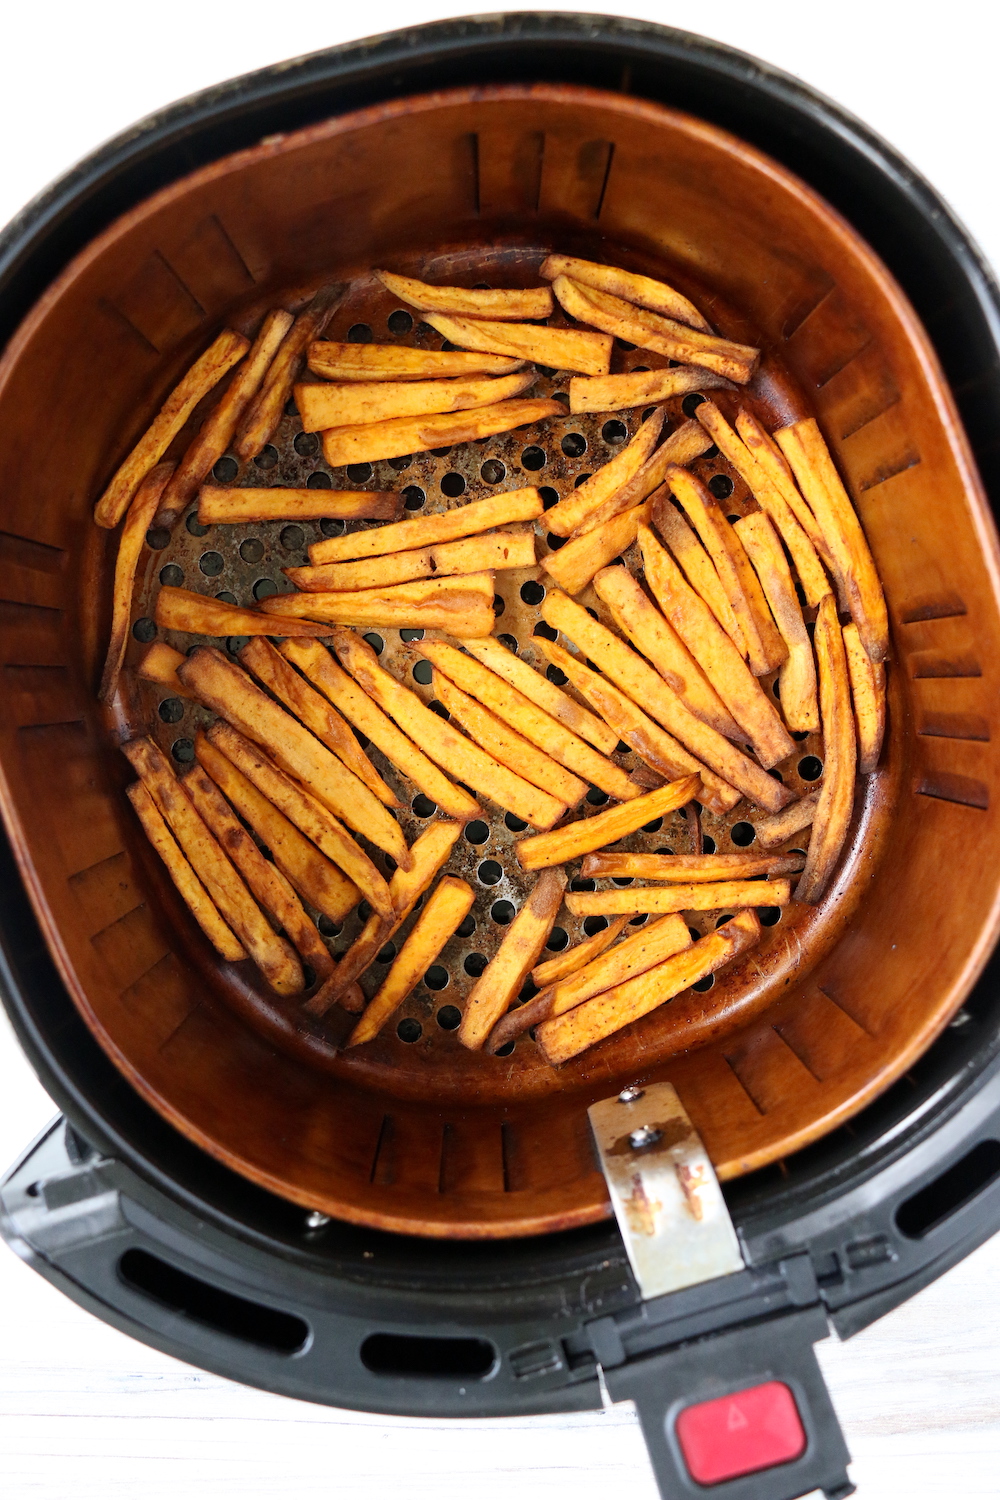 cooked sweet potato fries in air fryer basket